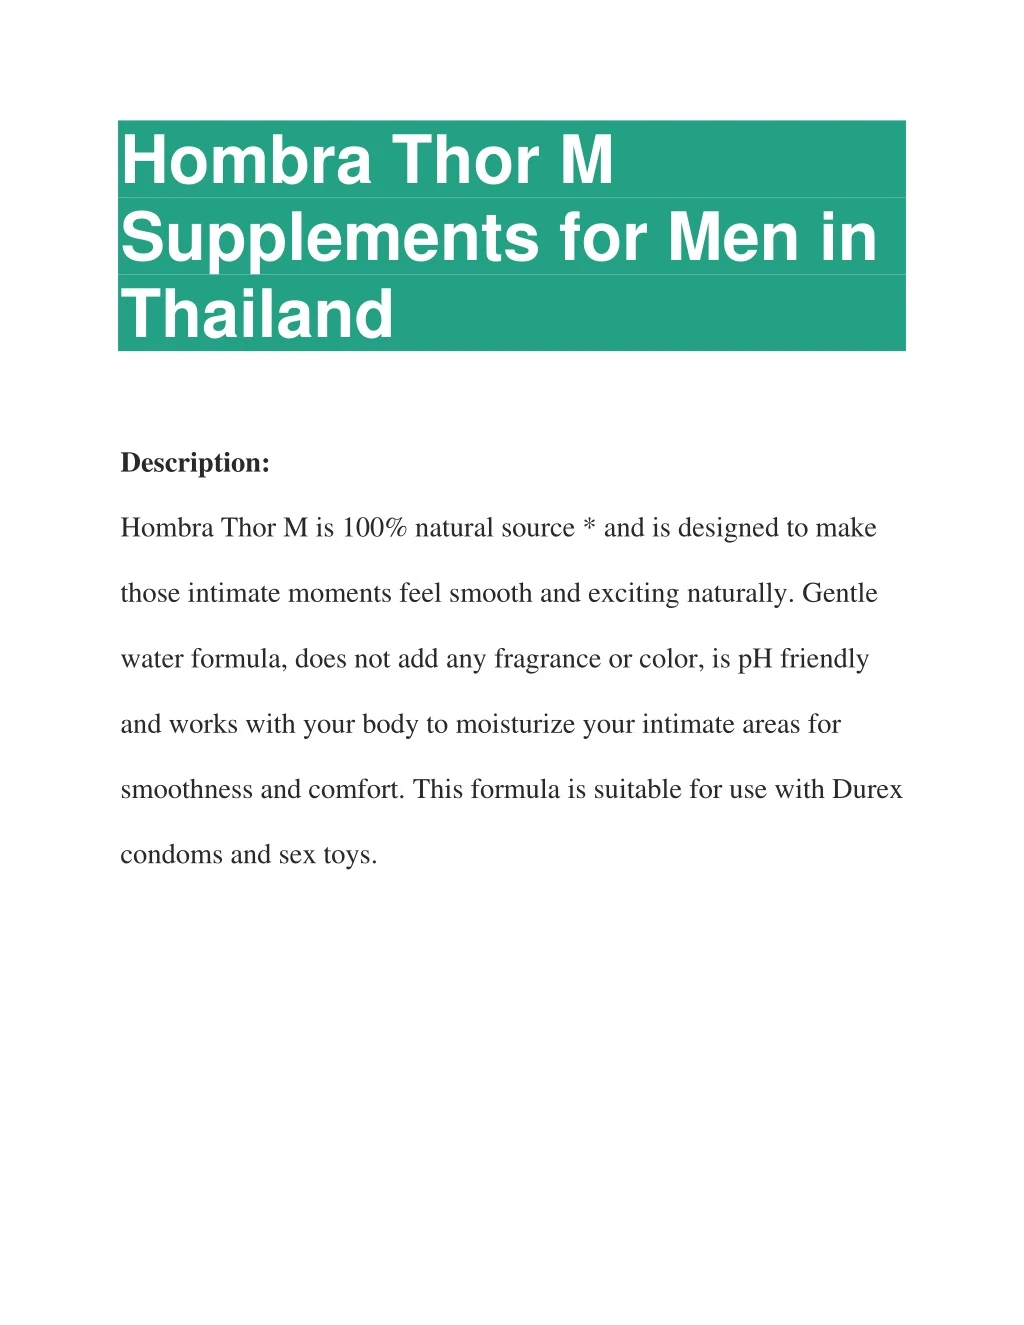 hombra thor m supplements for men in thailand